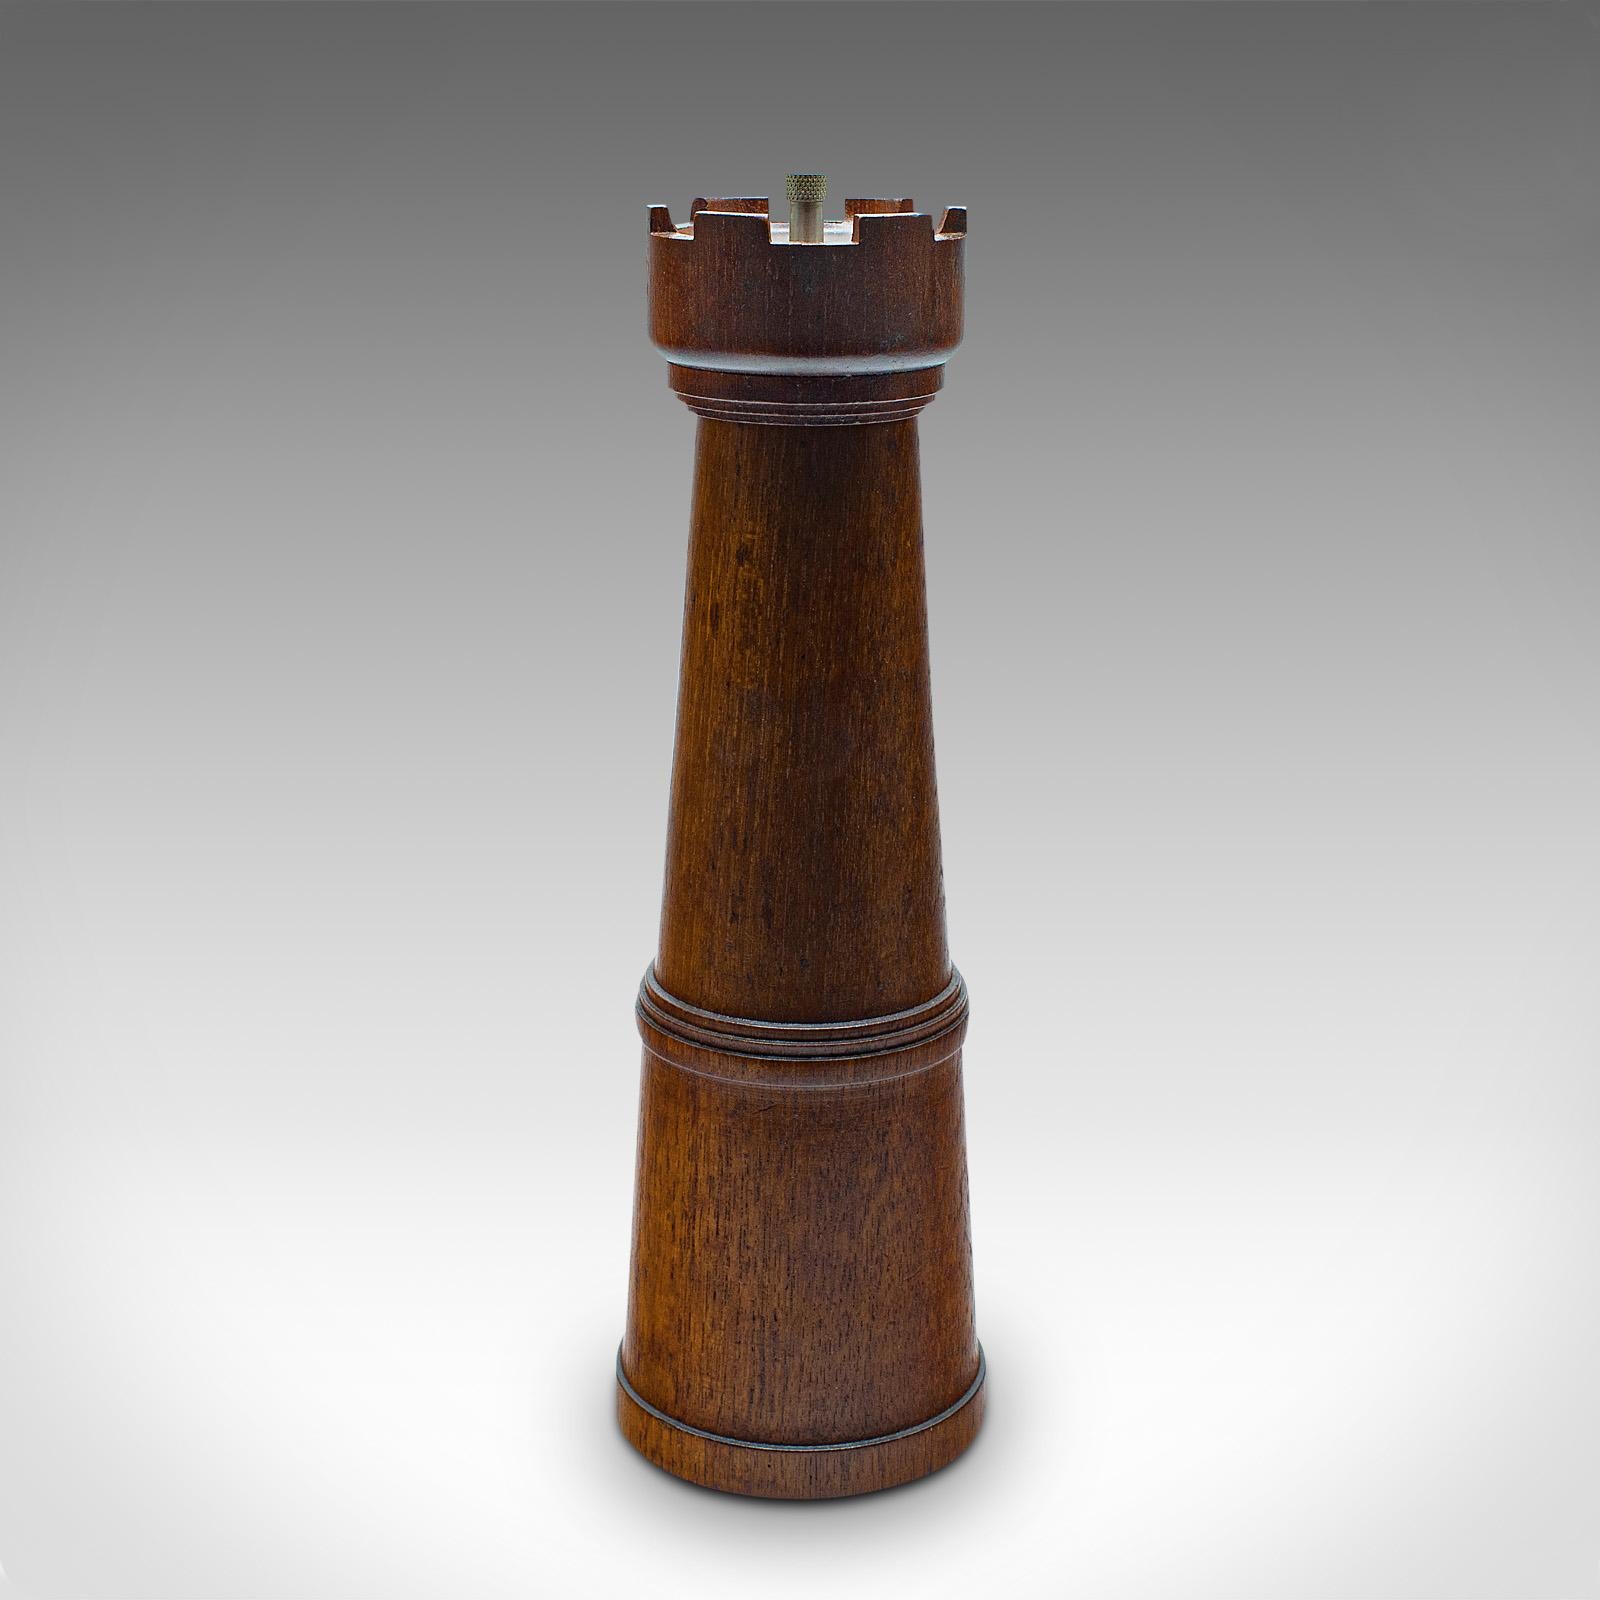 This is a vintage decorative pepper grinder. An English, oak condiment dispenser in the form of a chess rook, dating to the mid 20th century, circa 1960.

Delightfully crafted, ideal for the chess lover
Displays a desirable aged patina and in